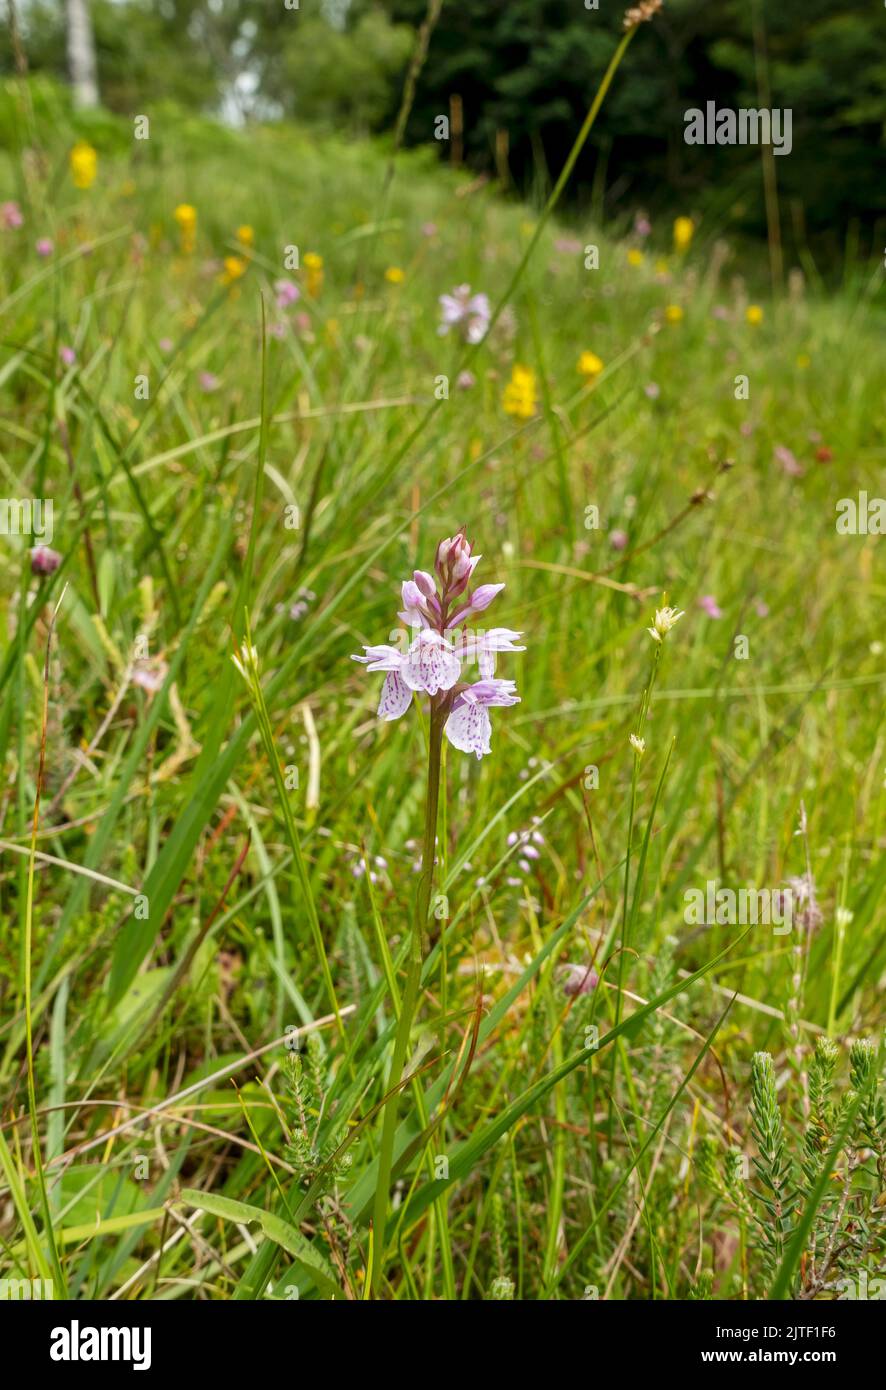 Close up of common spotted orchid orchids (Dactylorhiza fuchsii) flower flowers wildflowers growing in wetland bog area in summer England UK Britain Stock Photo